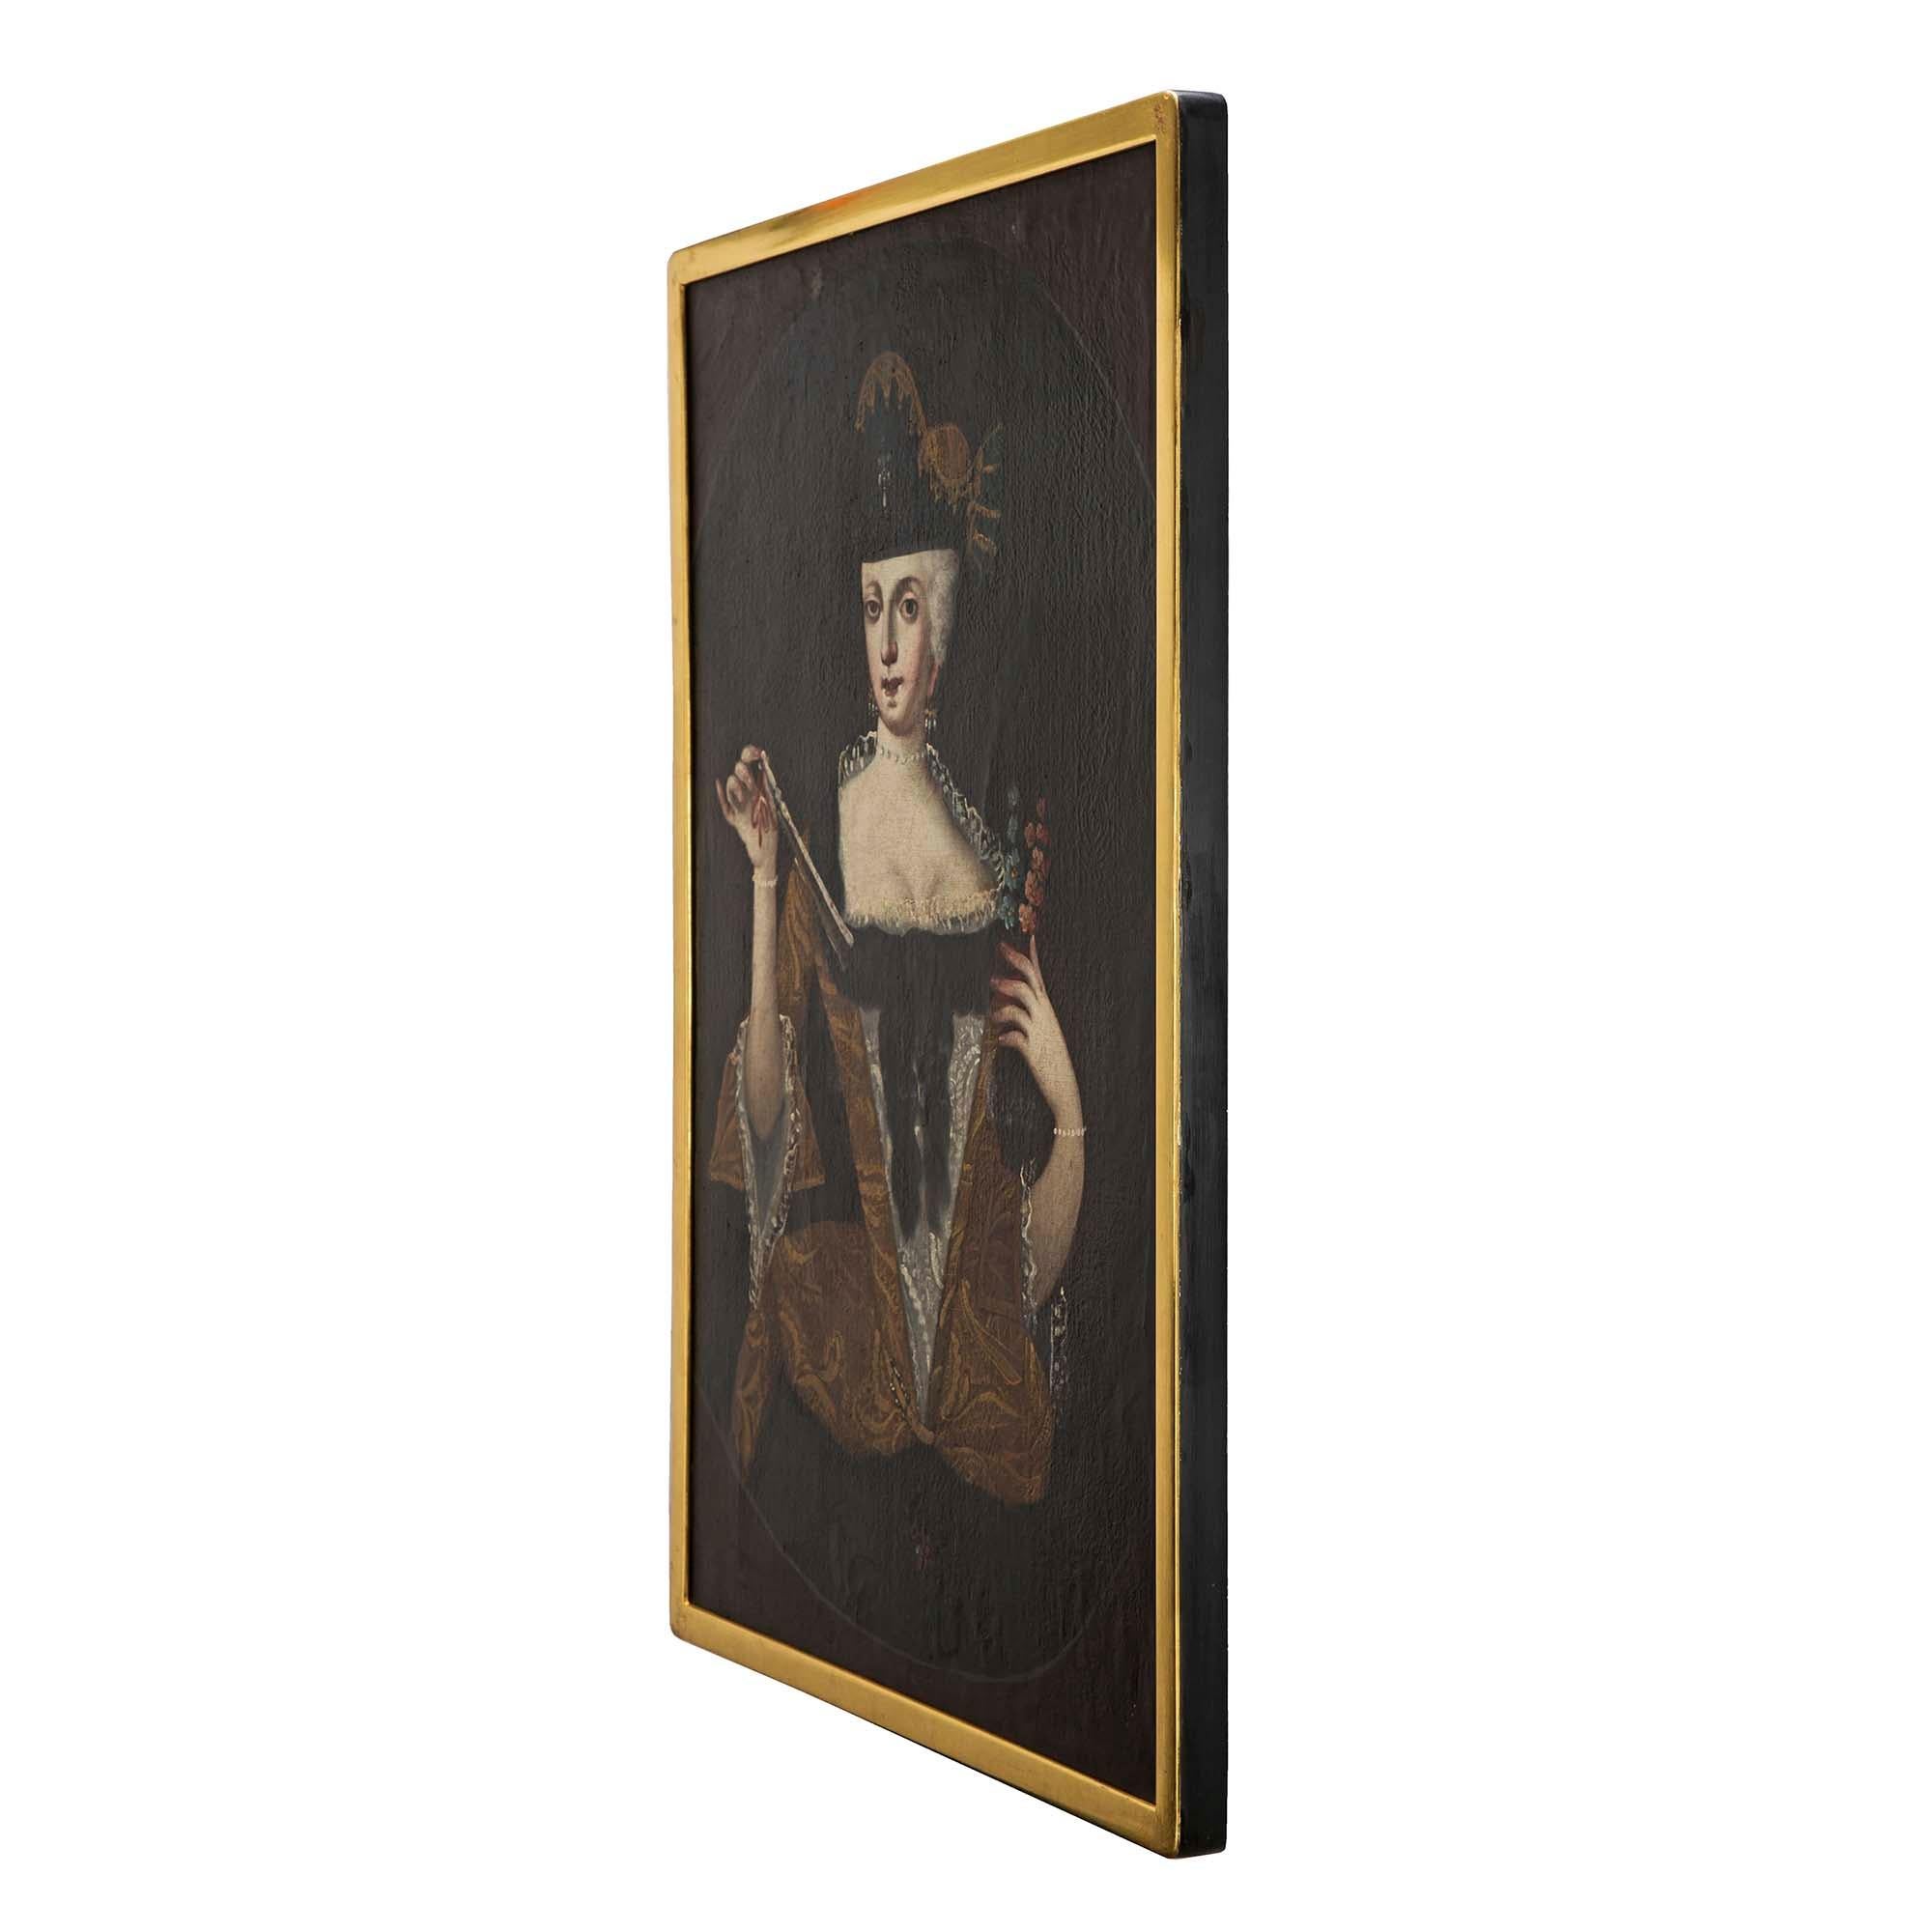 A Continental 18th century whimsical collection of charming paintings depicting Ladies of the 18th century. The set of four paintings is meant to be not only beautiful but also amusing. Noblewomen in period attire with their hair wonderfully styled